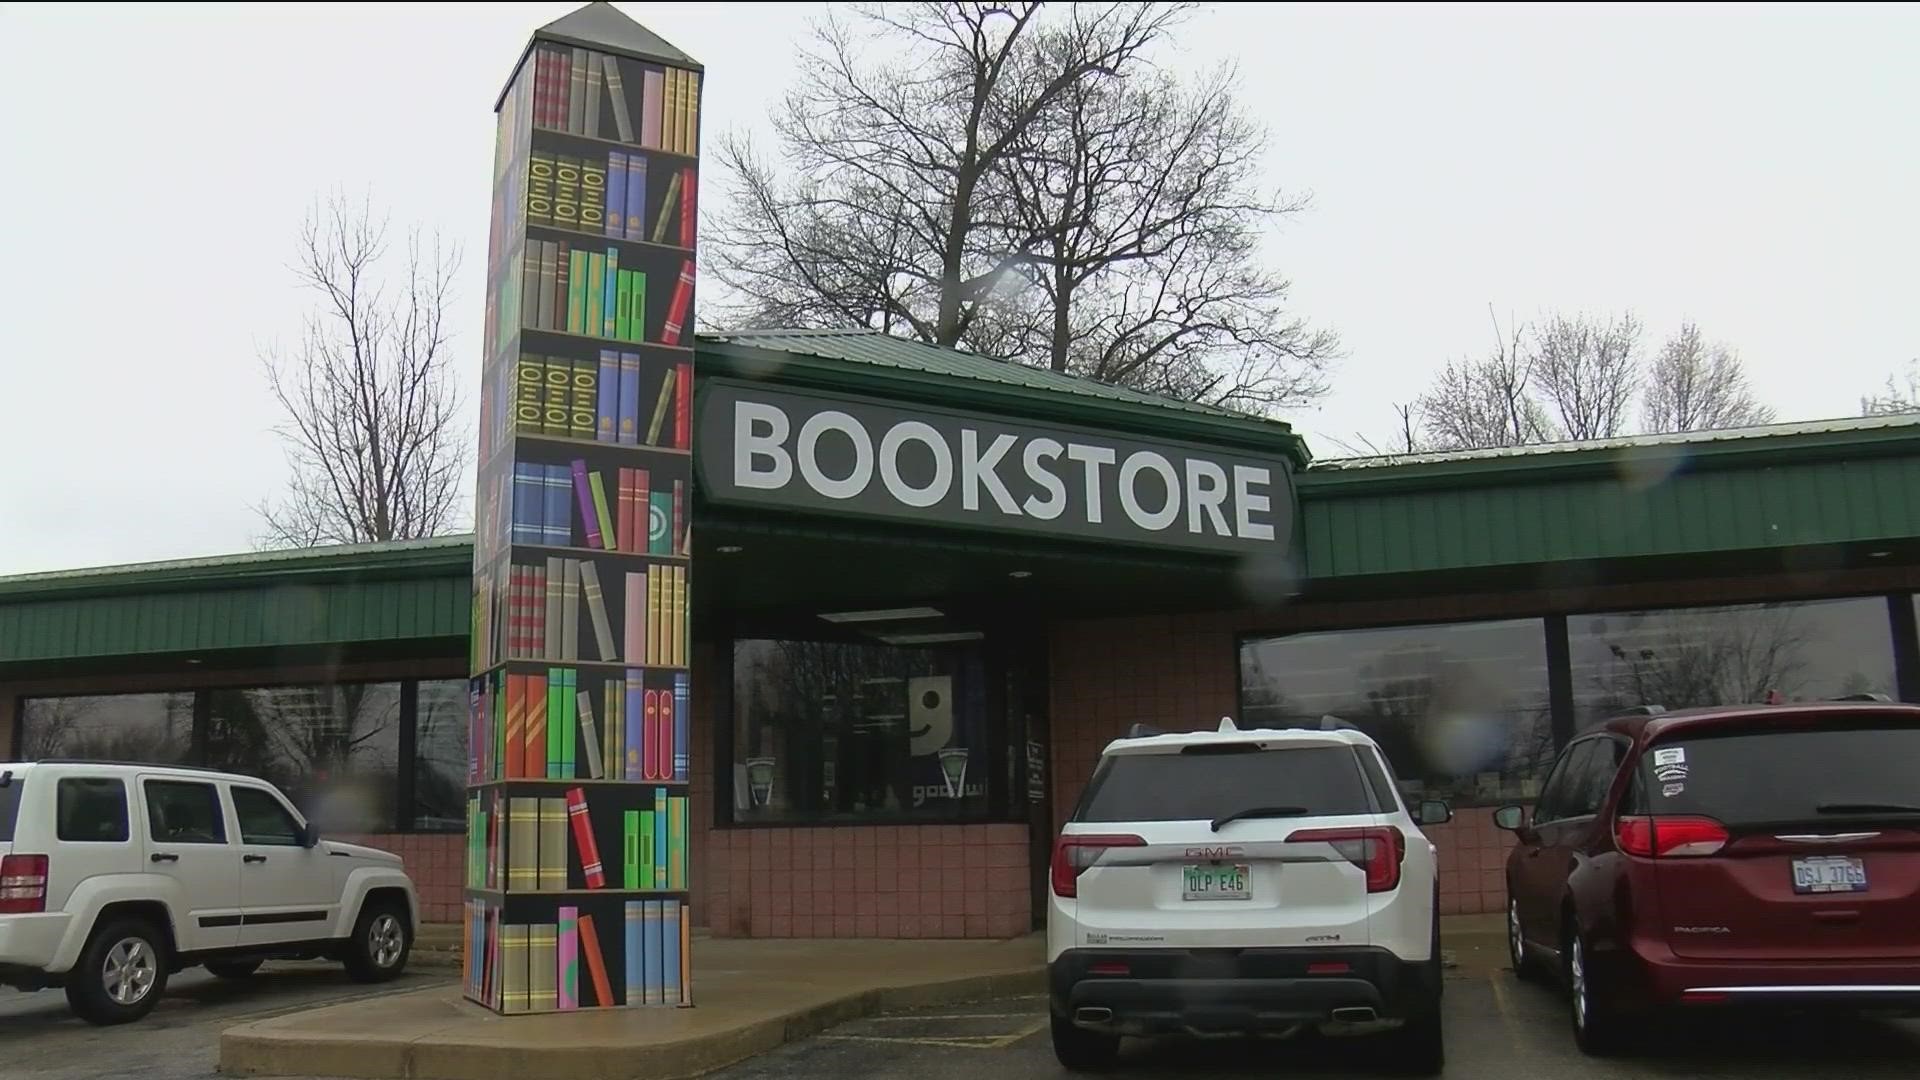 The Goodwill Bookstore also accepts donations of books and other goods. It's located at 8167 Lewis Ave. in Temperance, Michigan.